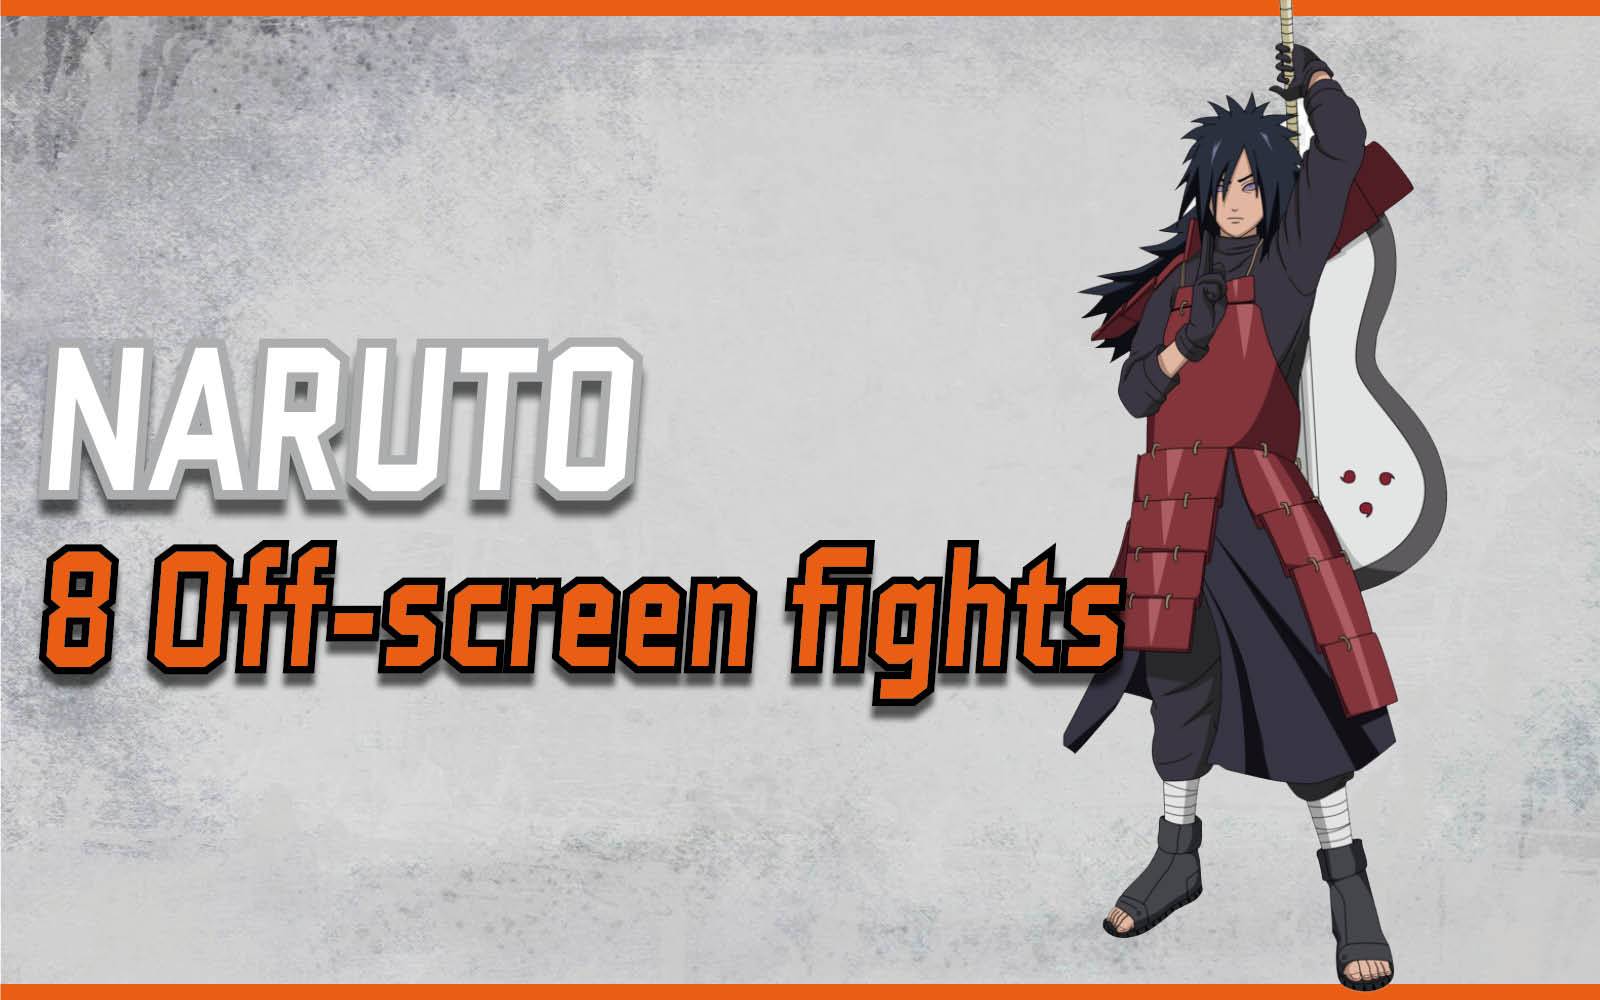 Off screen naruto fights